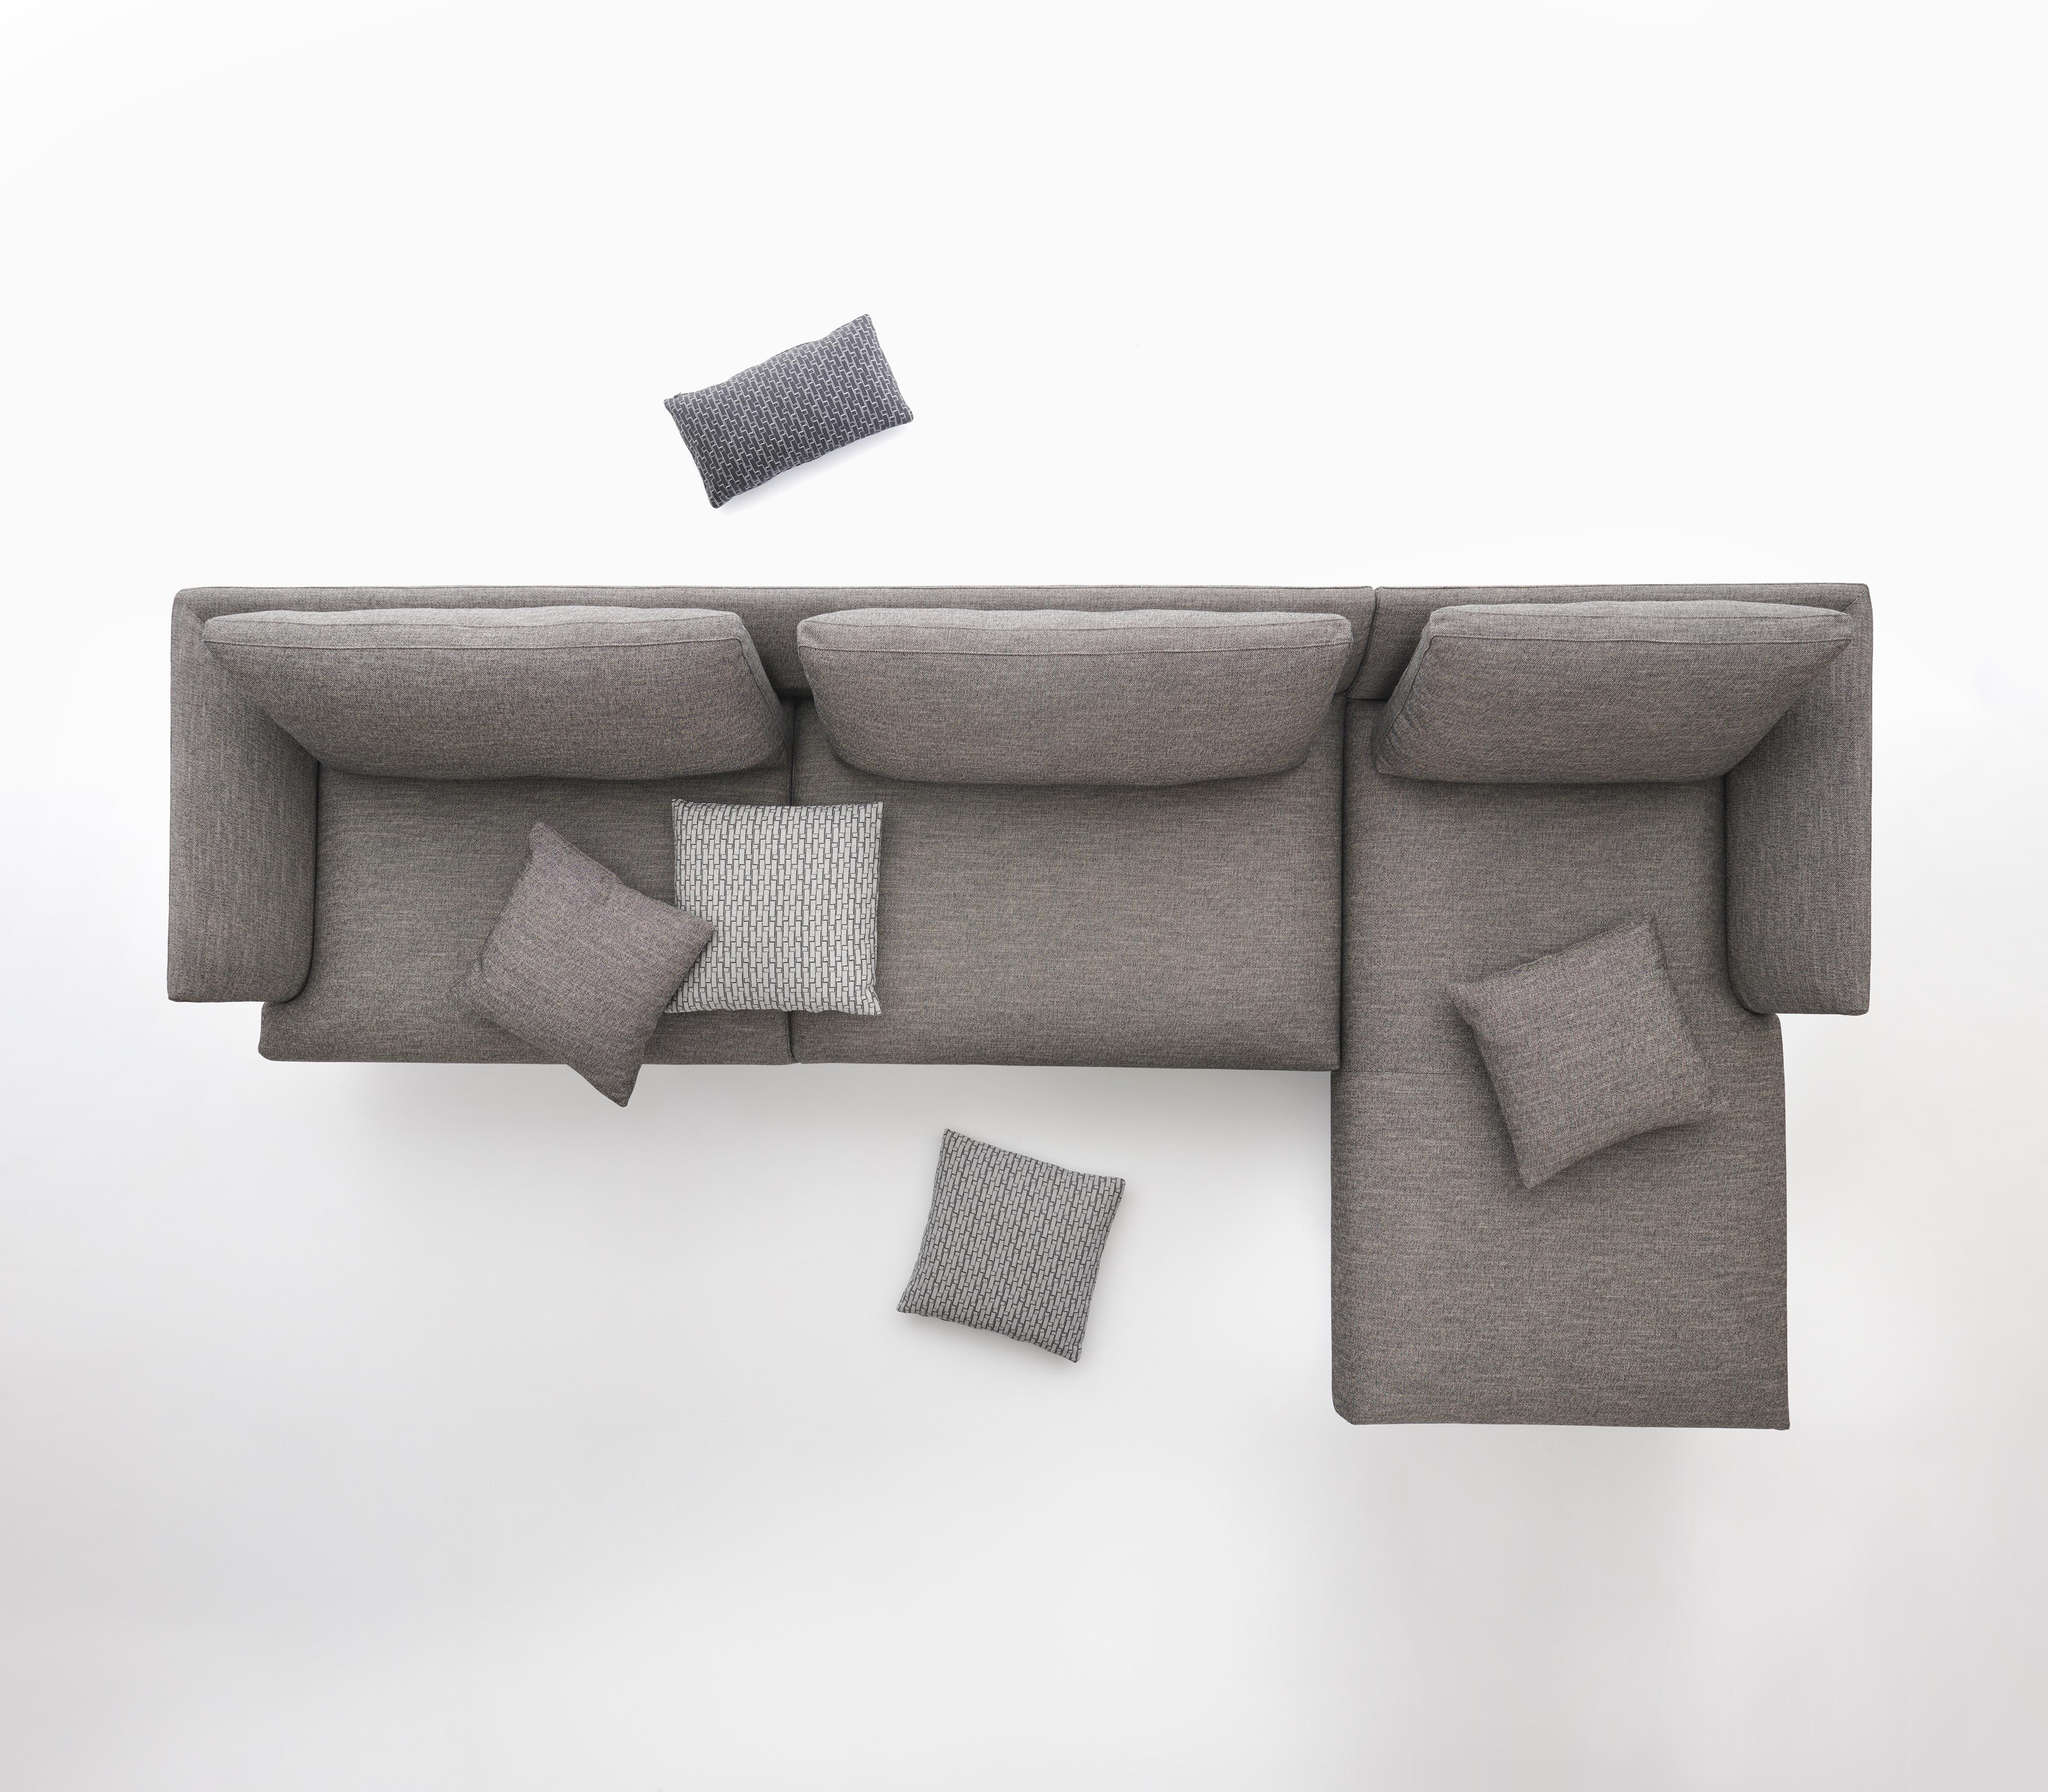 Zanotta Hiro Modular Sofa in Quadrifoglio Fabric with Aluminum Alloy Frame by Damian Williamson

Aluminum alloy feet, either polished or with natural or black nickel-satin finish. Steel frame. Elastic strips suspension. Frame upholstered with